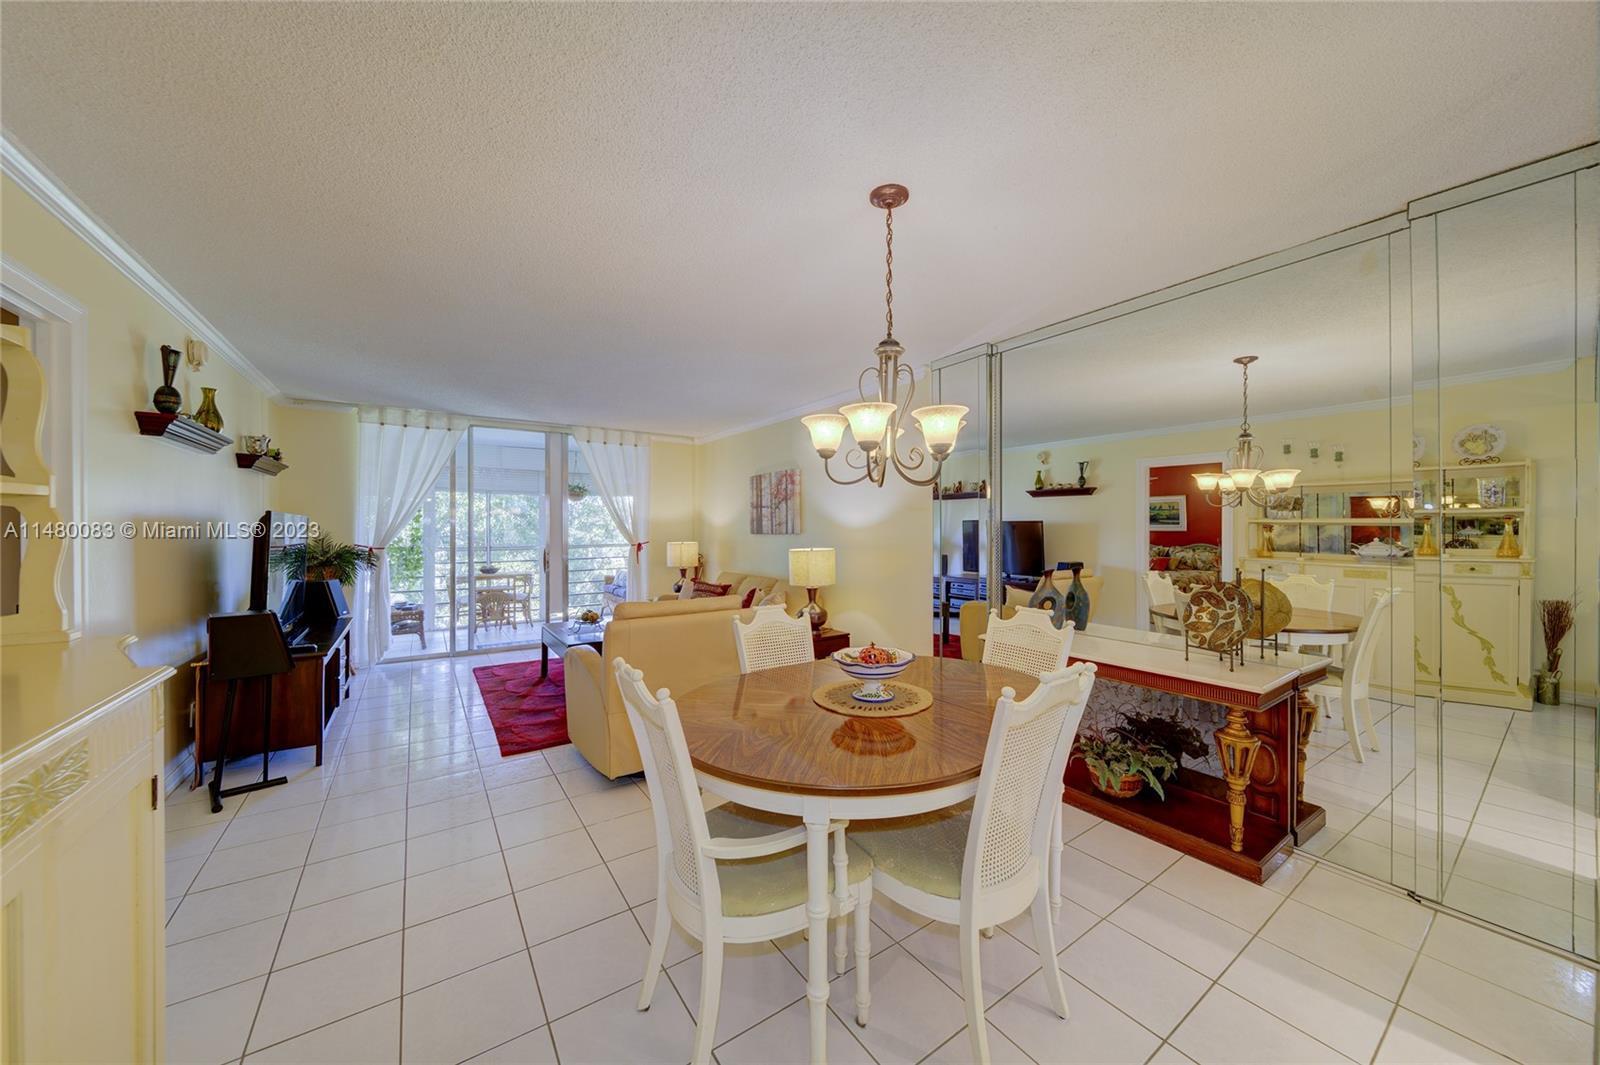 Photo of 2901 NW 48th Ave #468 in Lauderdale Lakes, FL